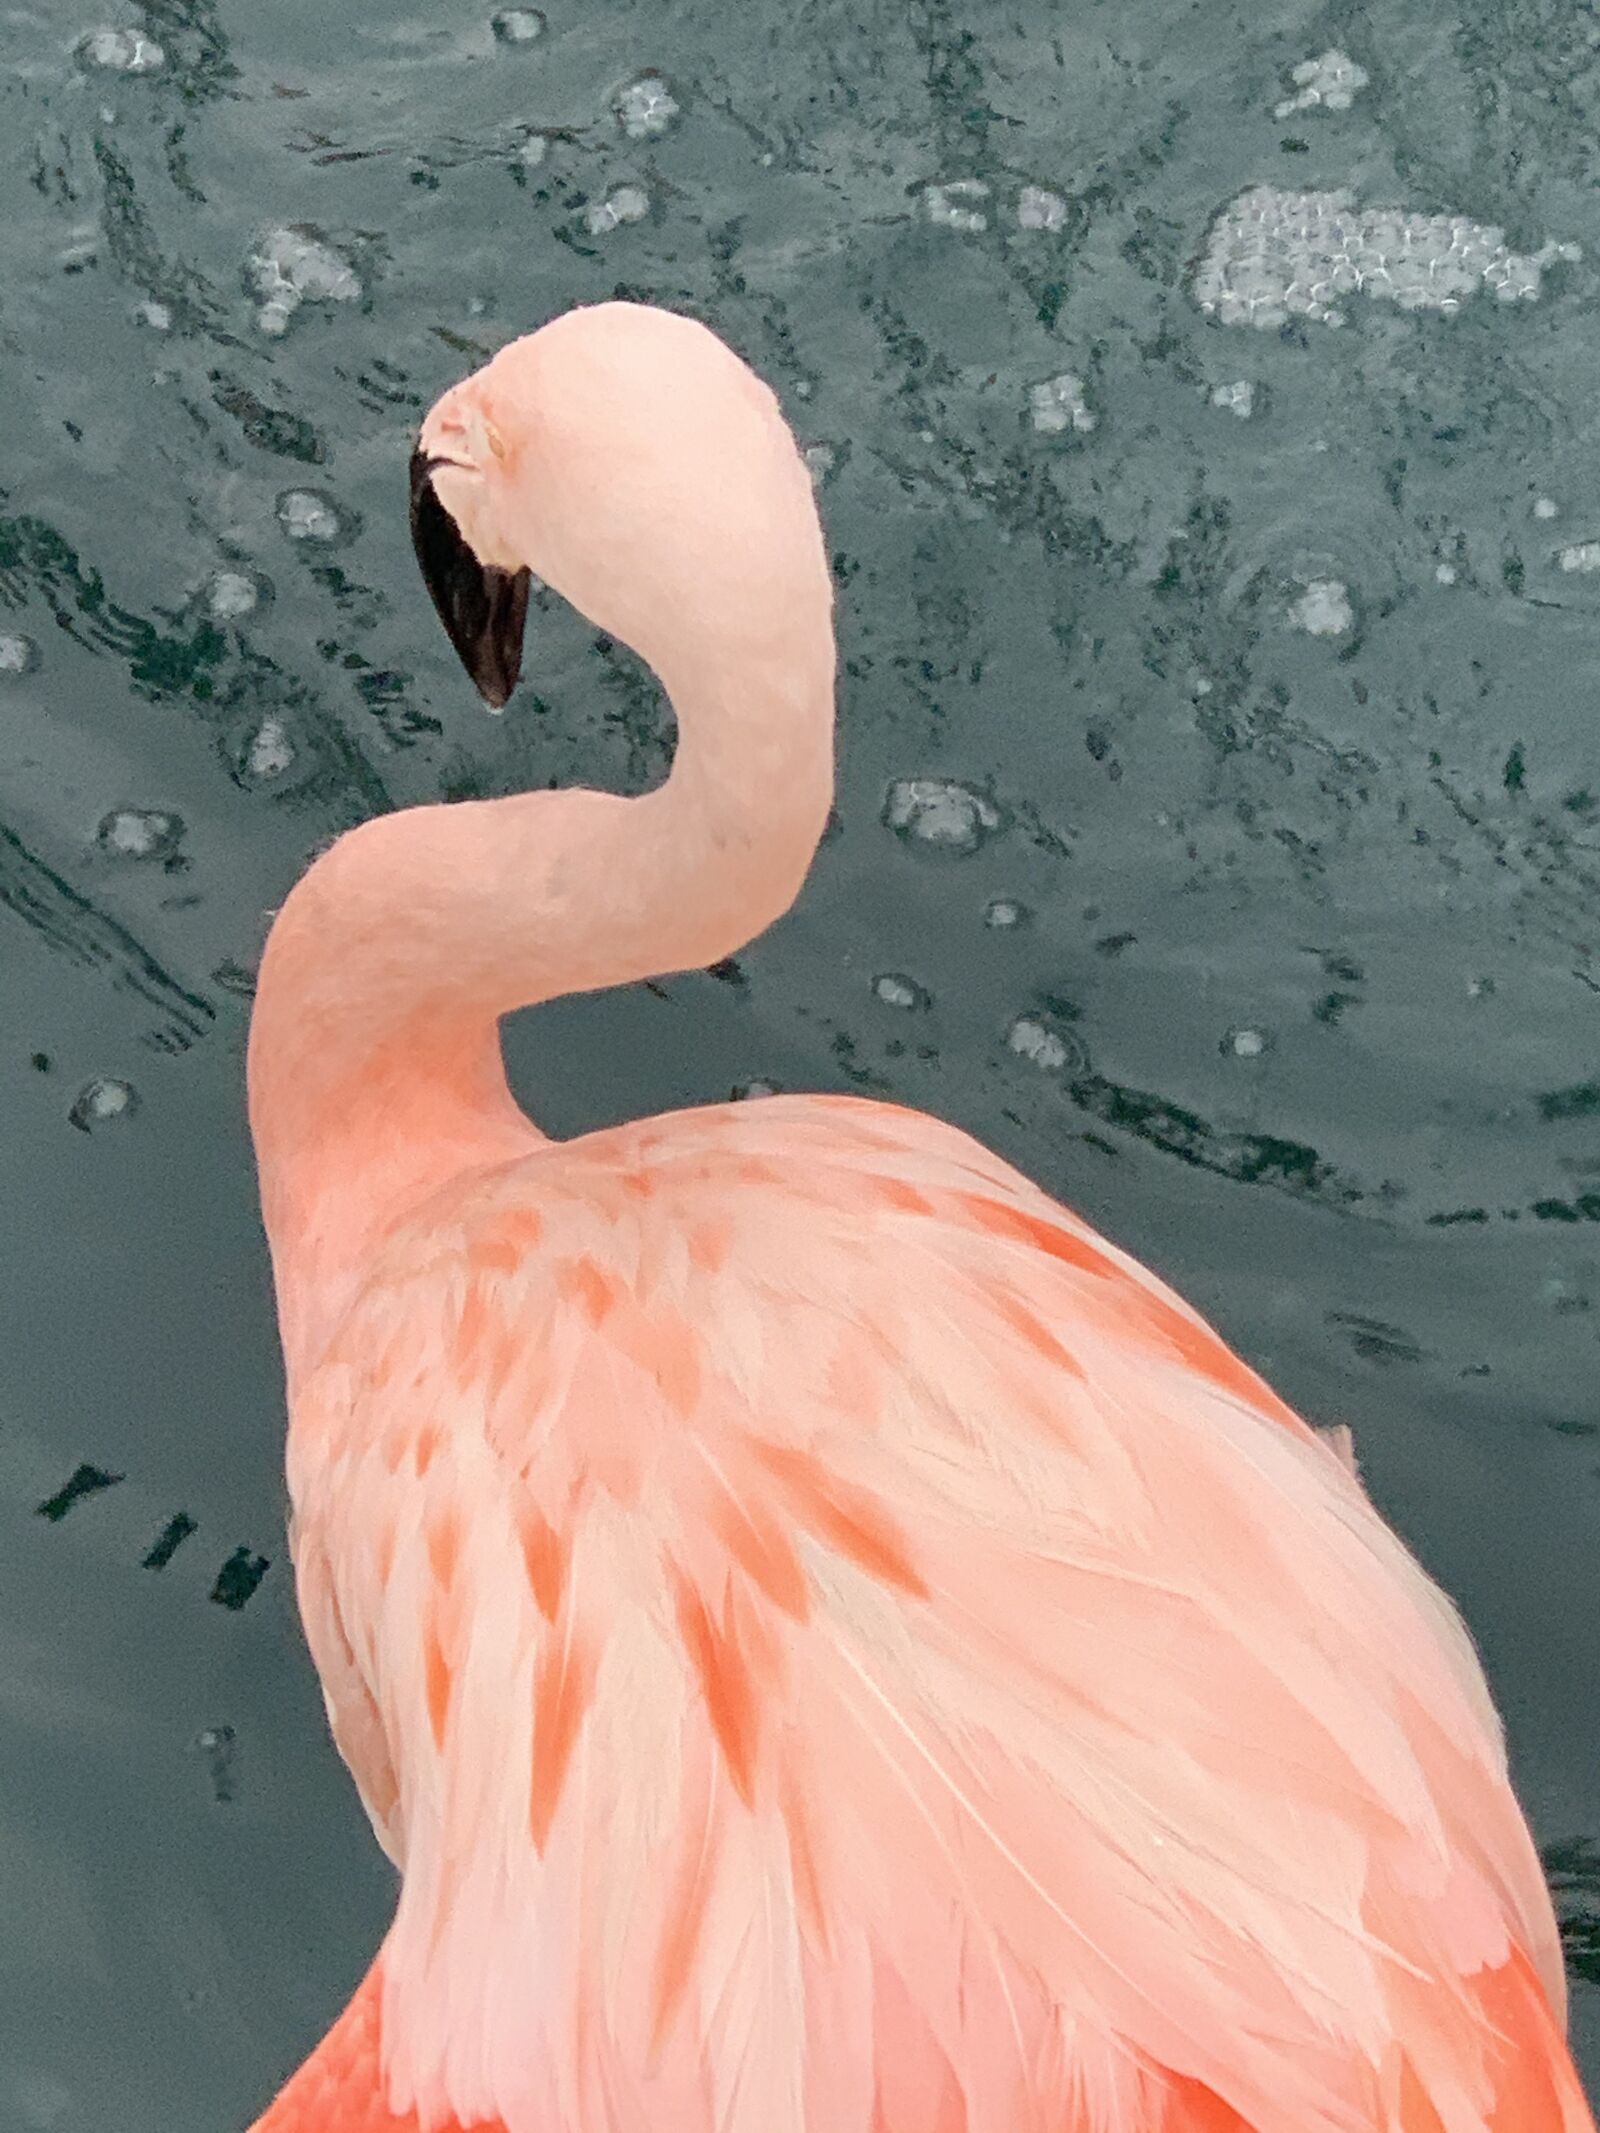 Apple iPhone XS Max + iPhone XS Max back dual camera 6mm f/2.4 sample photo. Flamingo, feathers, flamingoes photography